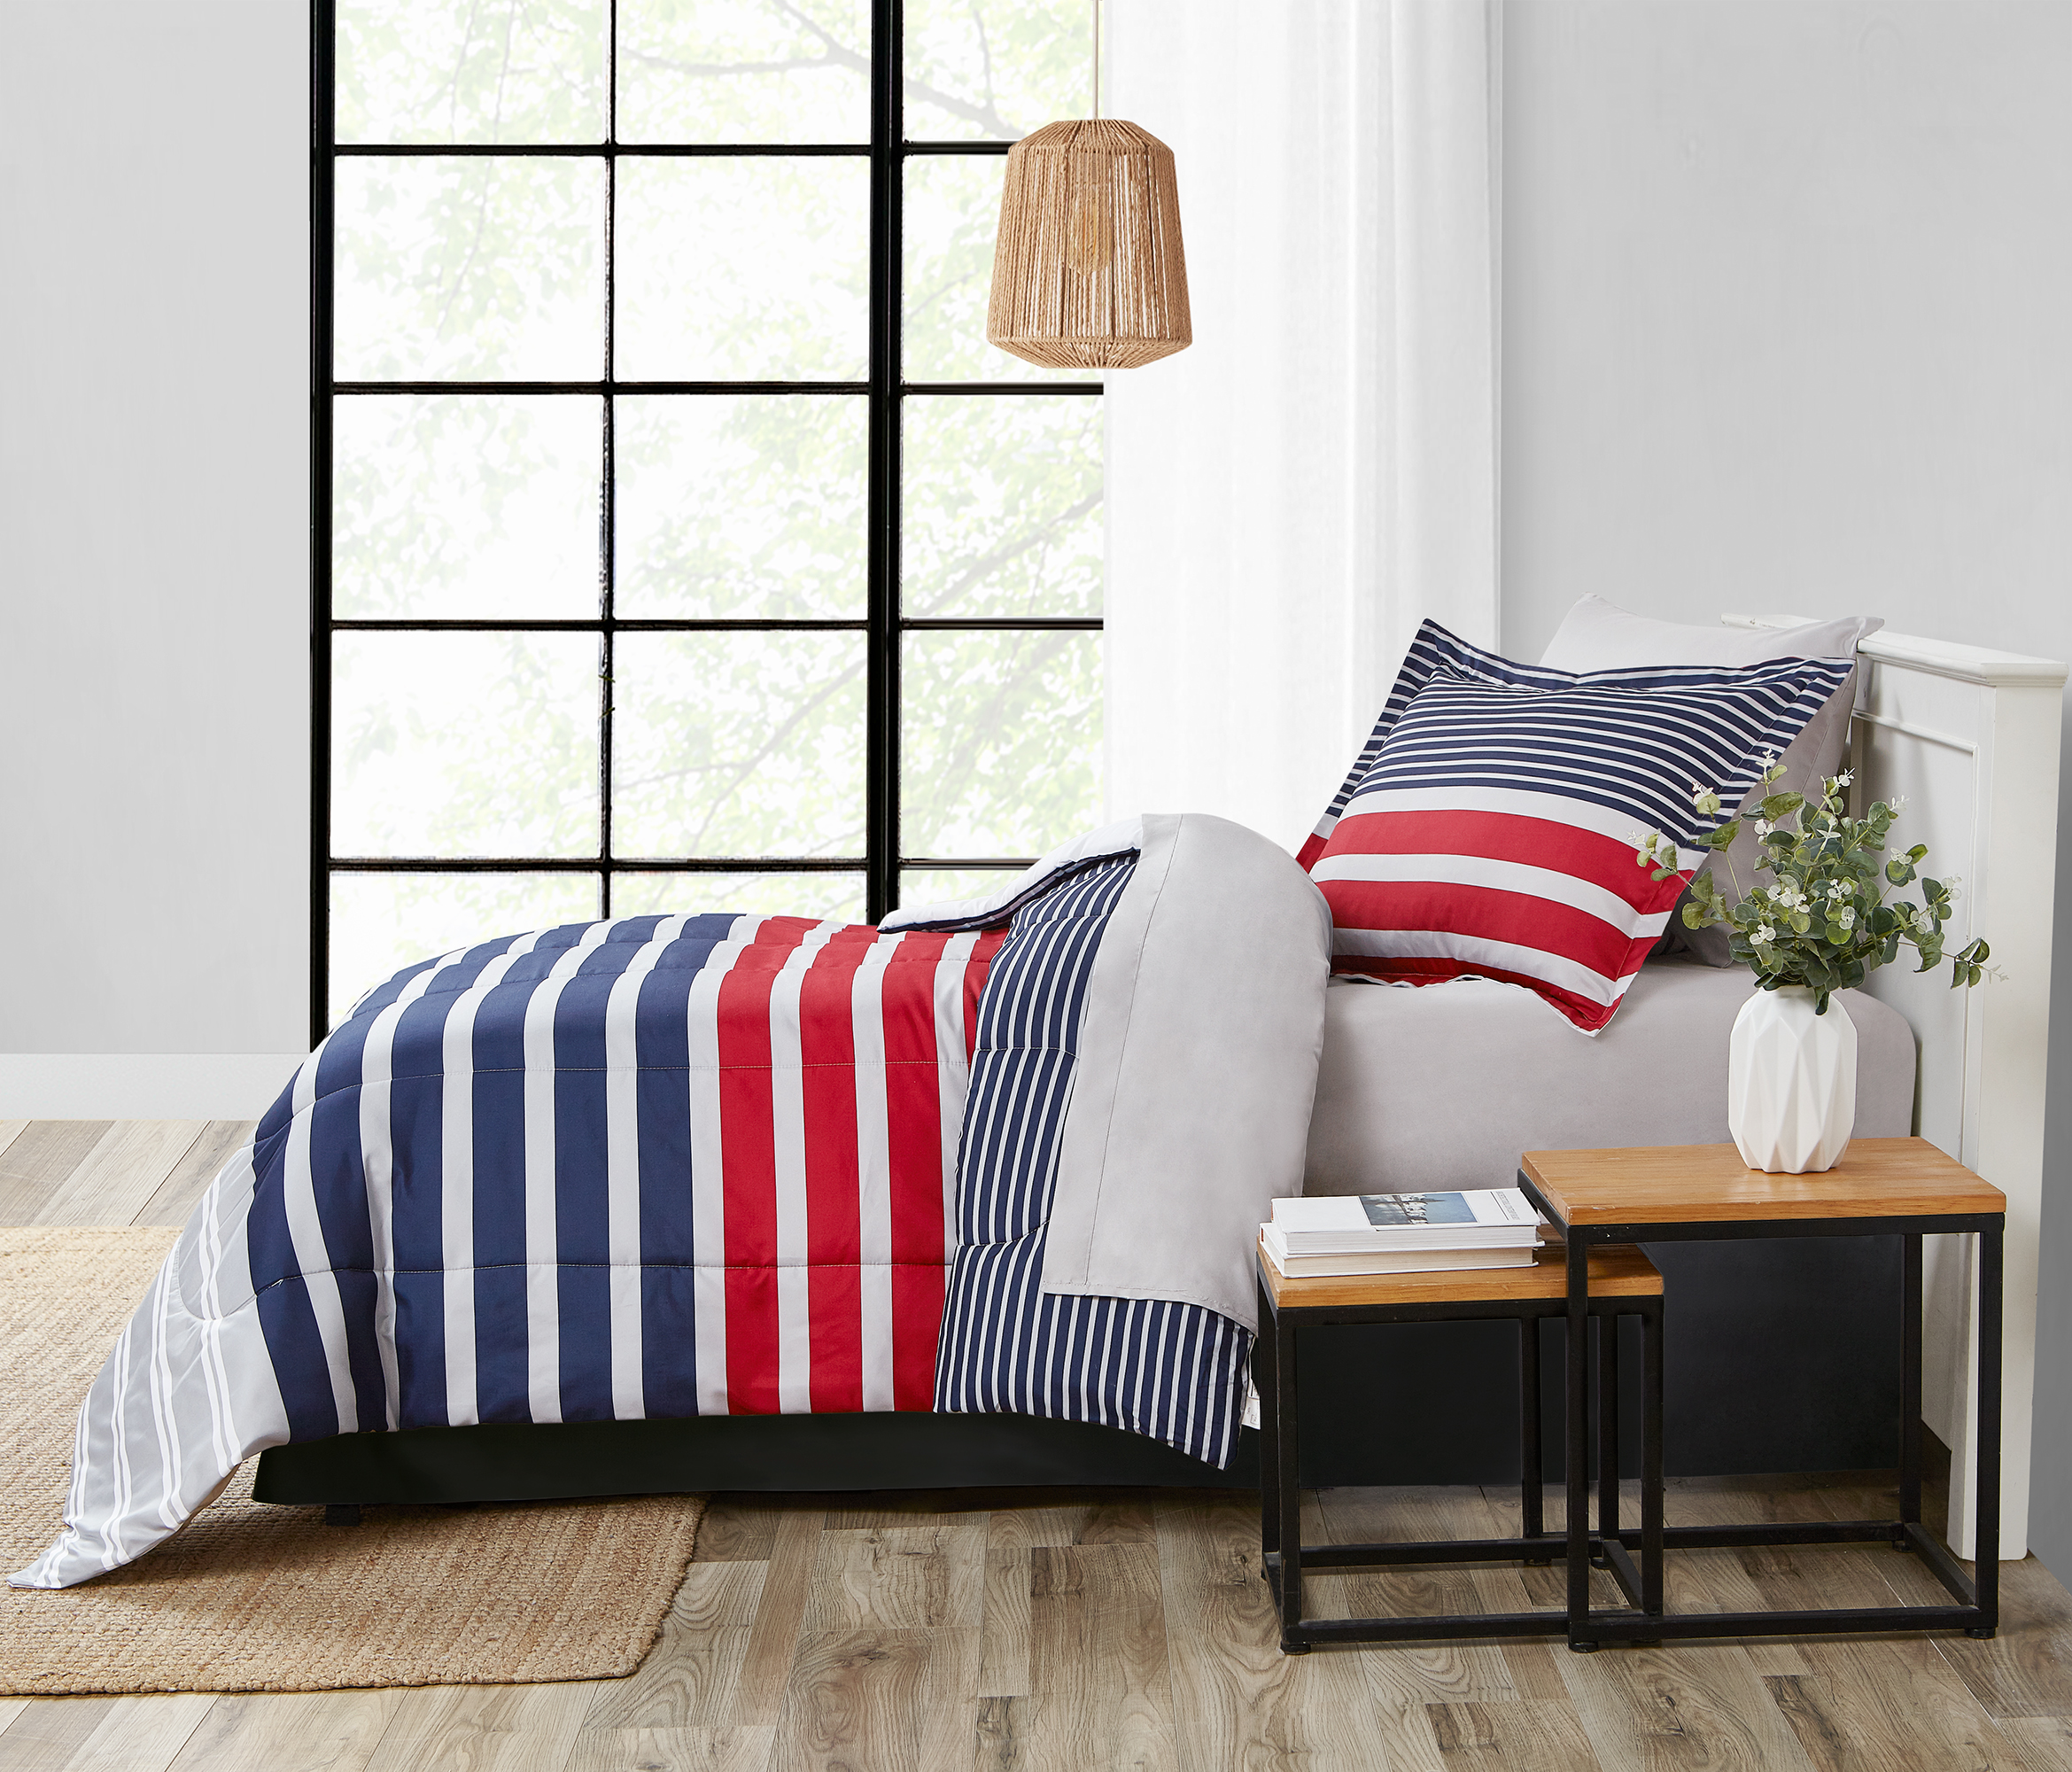 Mainstays Red and Blue Stripe 6 Piece Bed in a Bag Comforter Set with Sheets, Twin - image 3 of 9